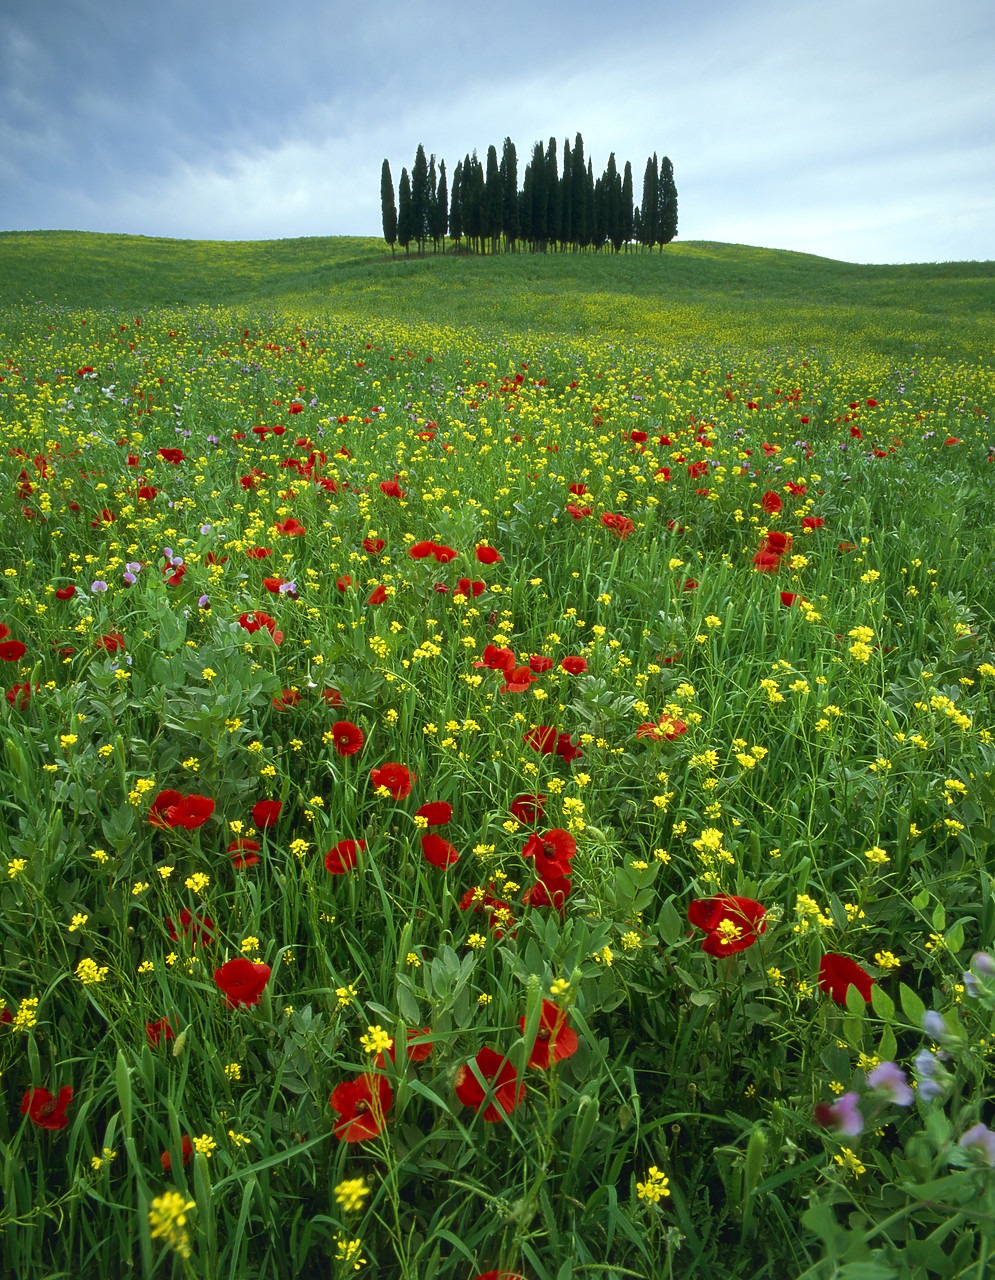 #020120-3 - Cypress Trees and Field of Wildflowers, near San Quirico, Tuscany, Italy